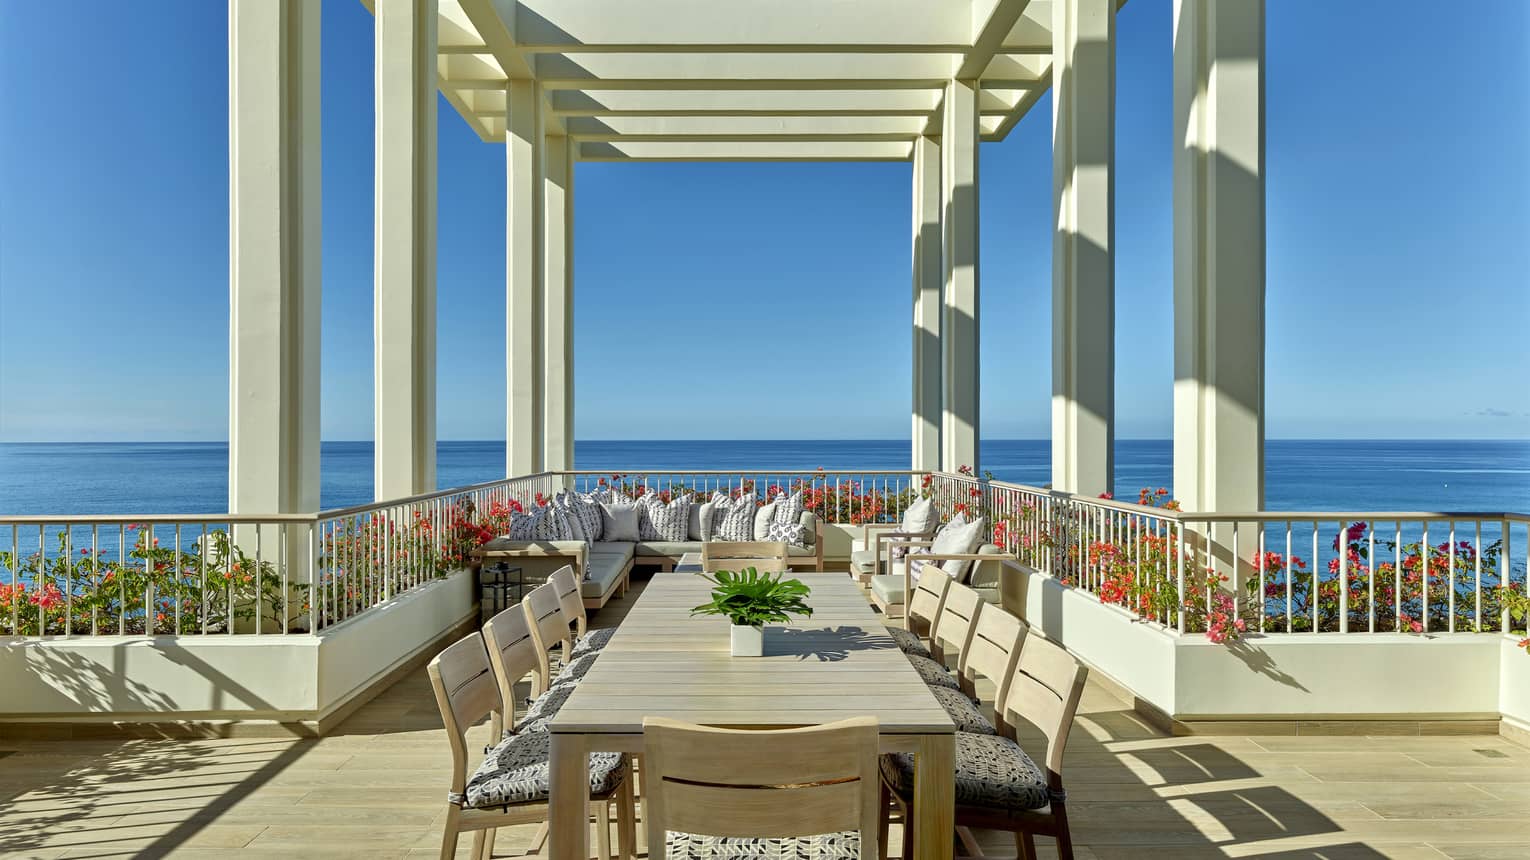 Ocean-view terrace with long dining table under pergola